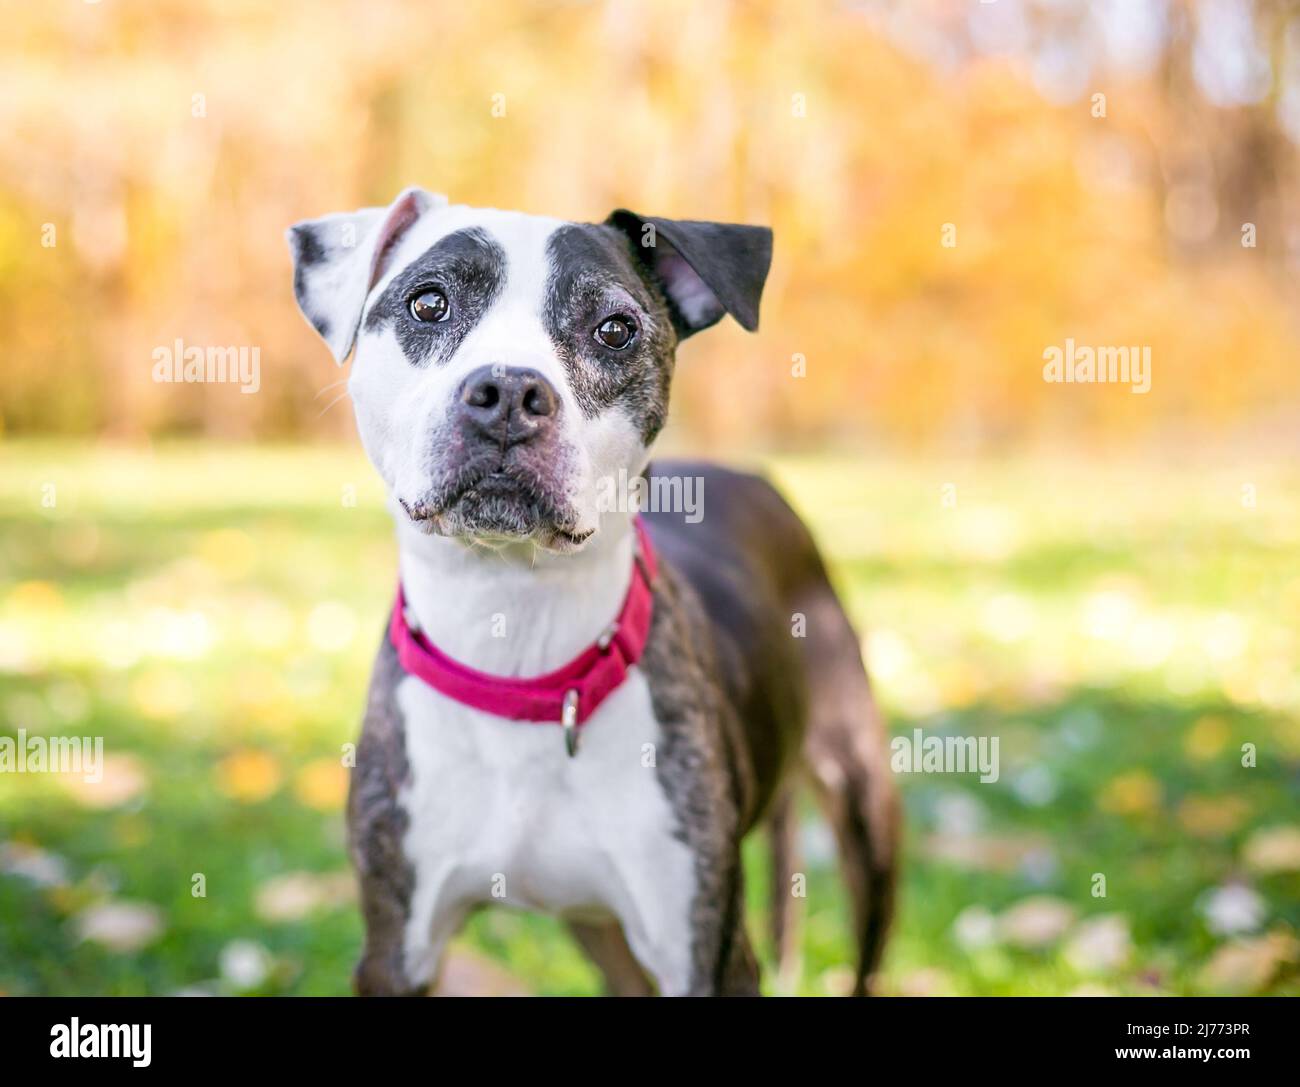 A senior Pit Bull Terrier mixed breed dog wearing a red collar outdoors Stock Photo